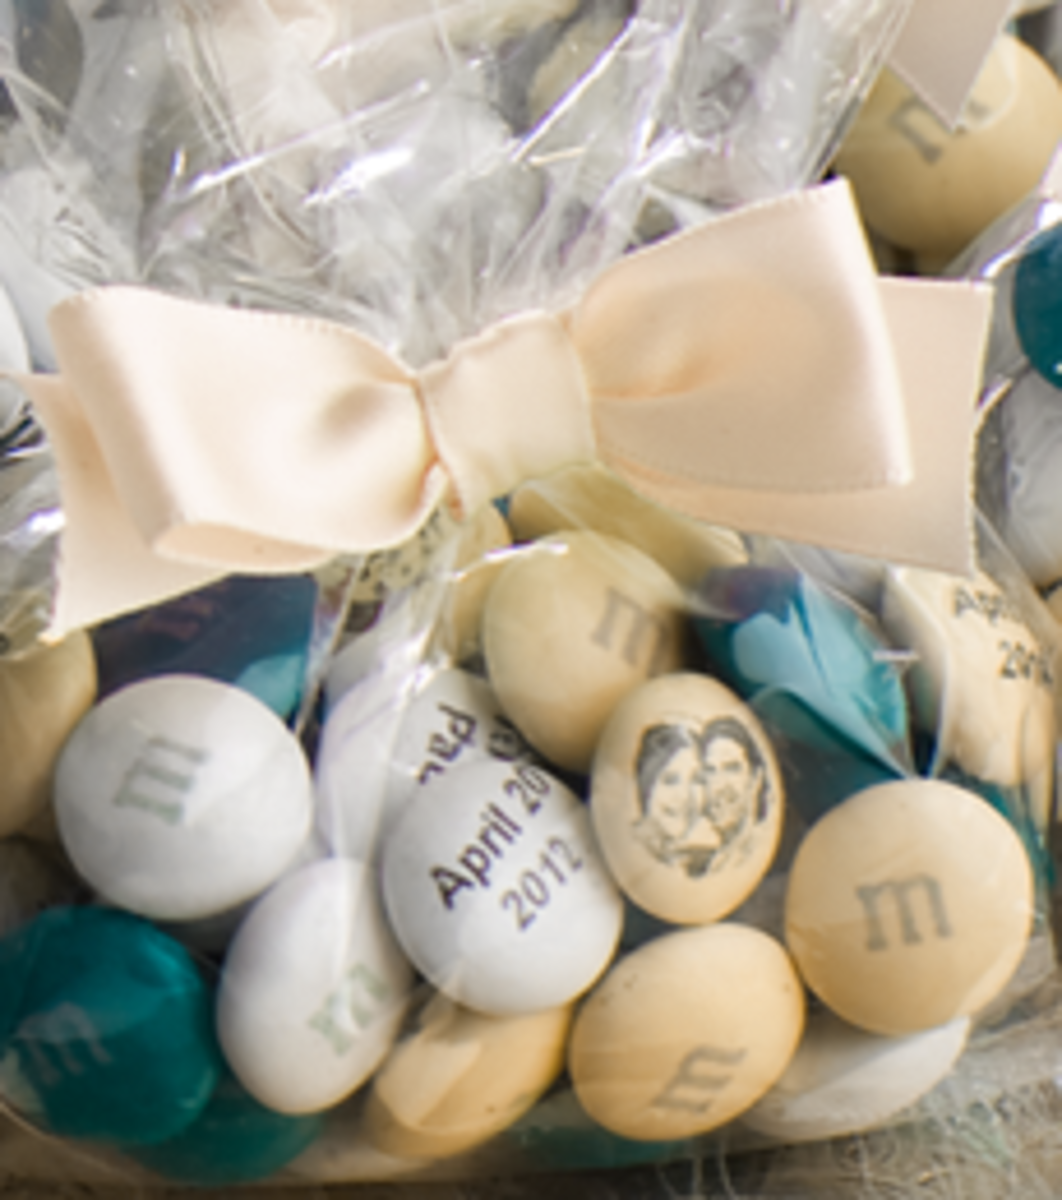 Personalize M & M's ® with words and faces